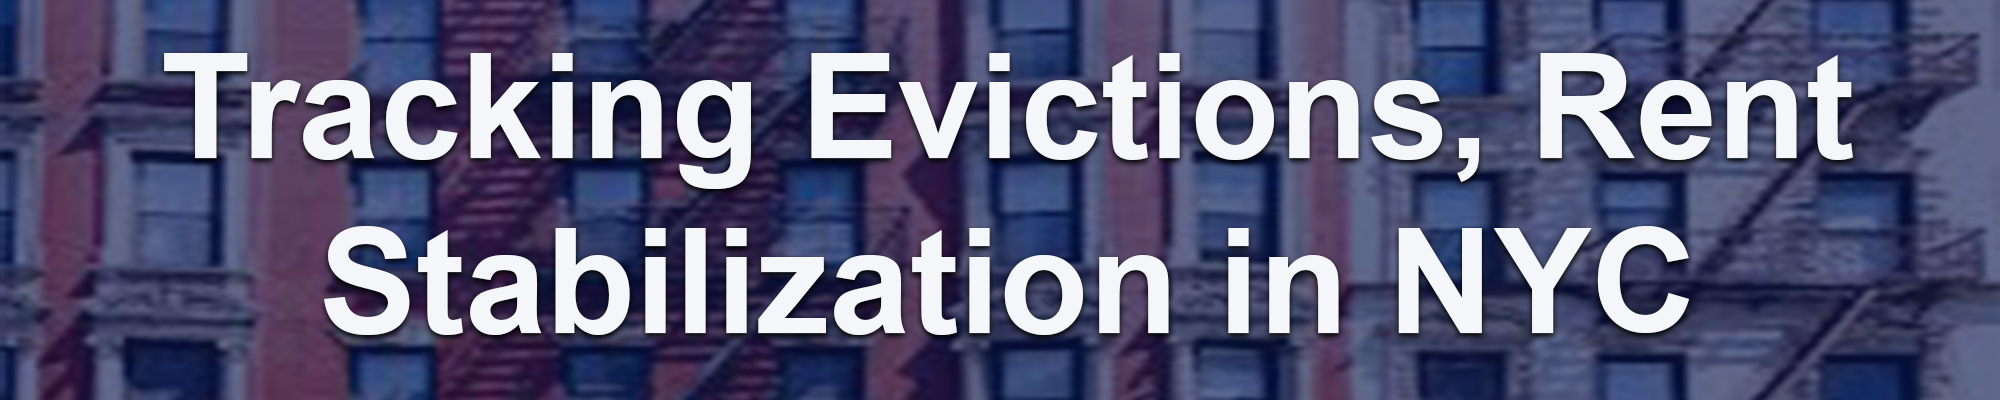 Tracking Evictions